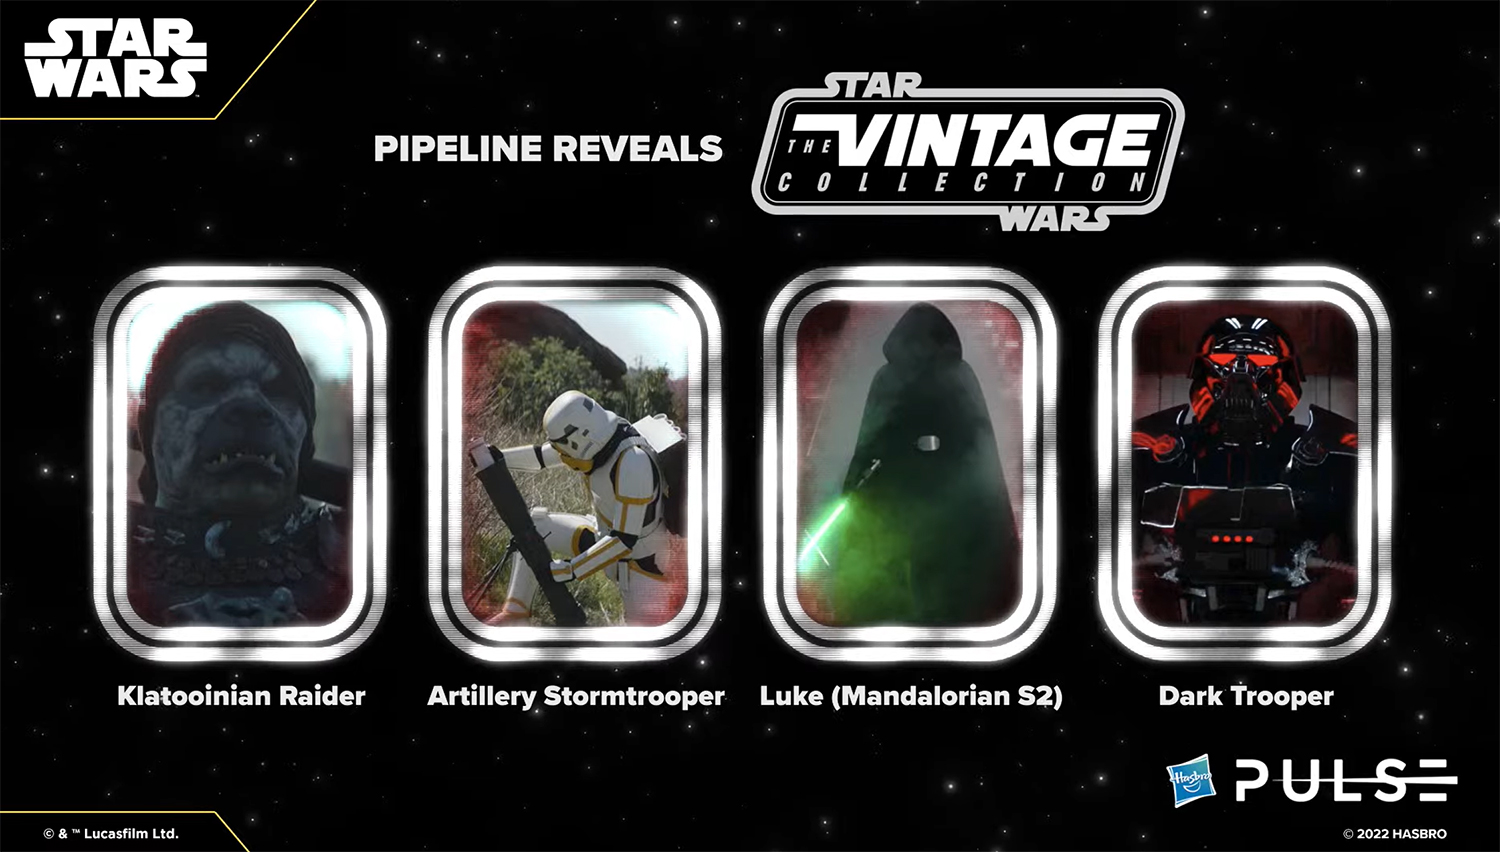 Vintage Collection Pipeline reveal